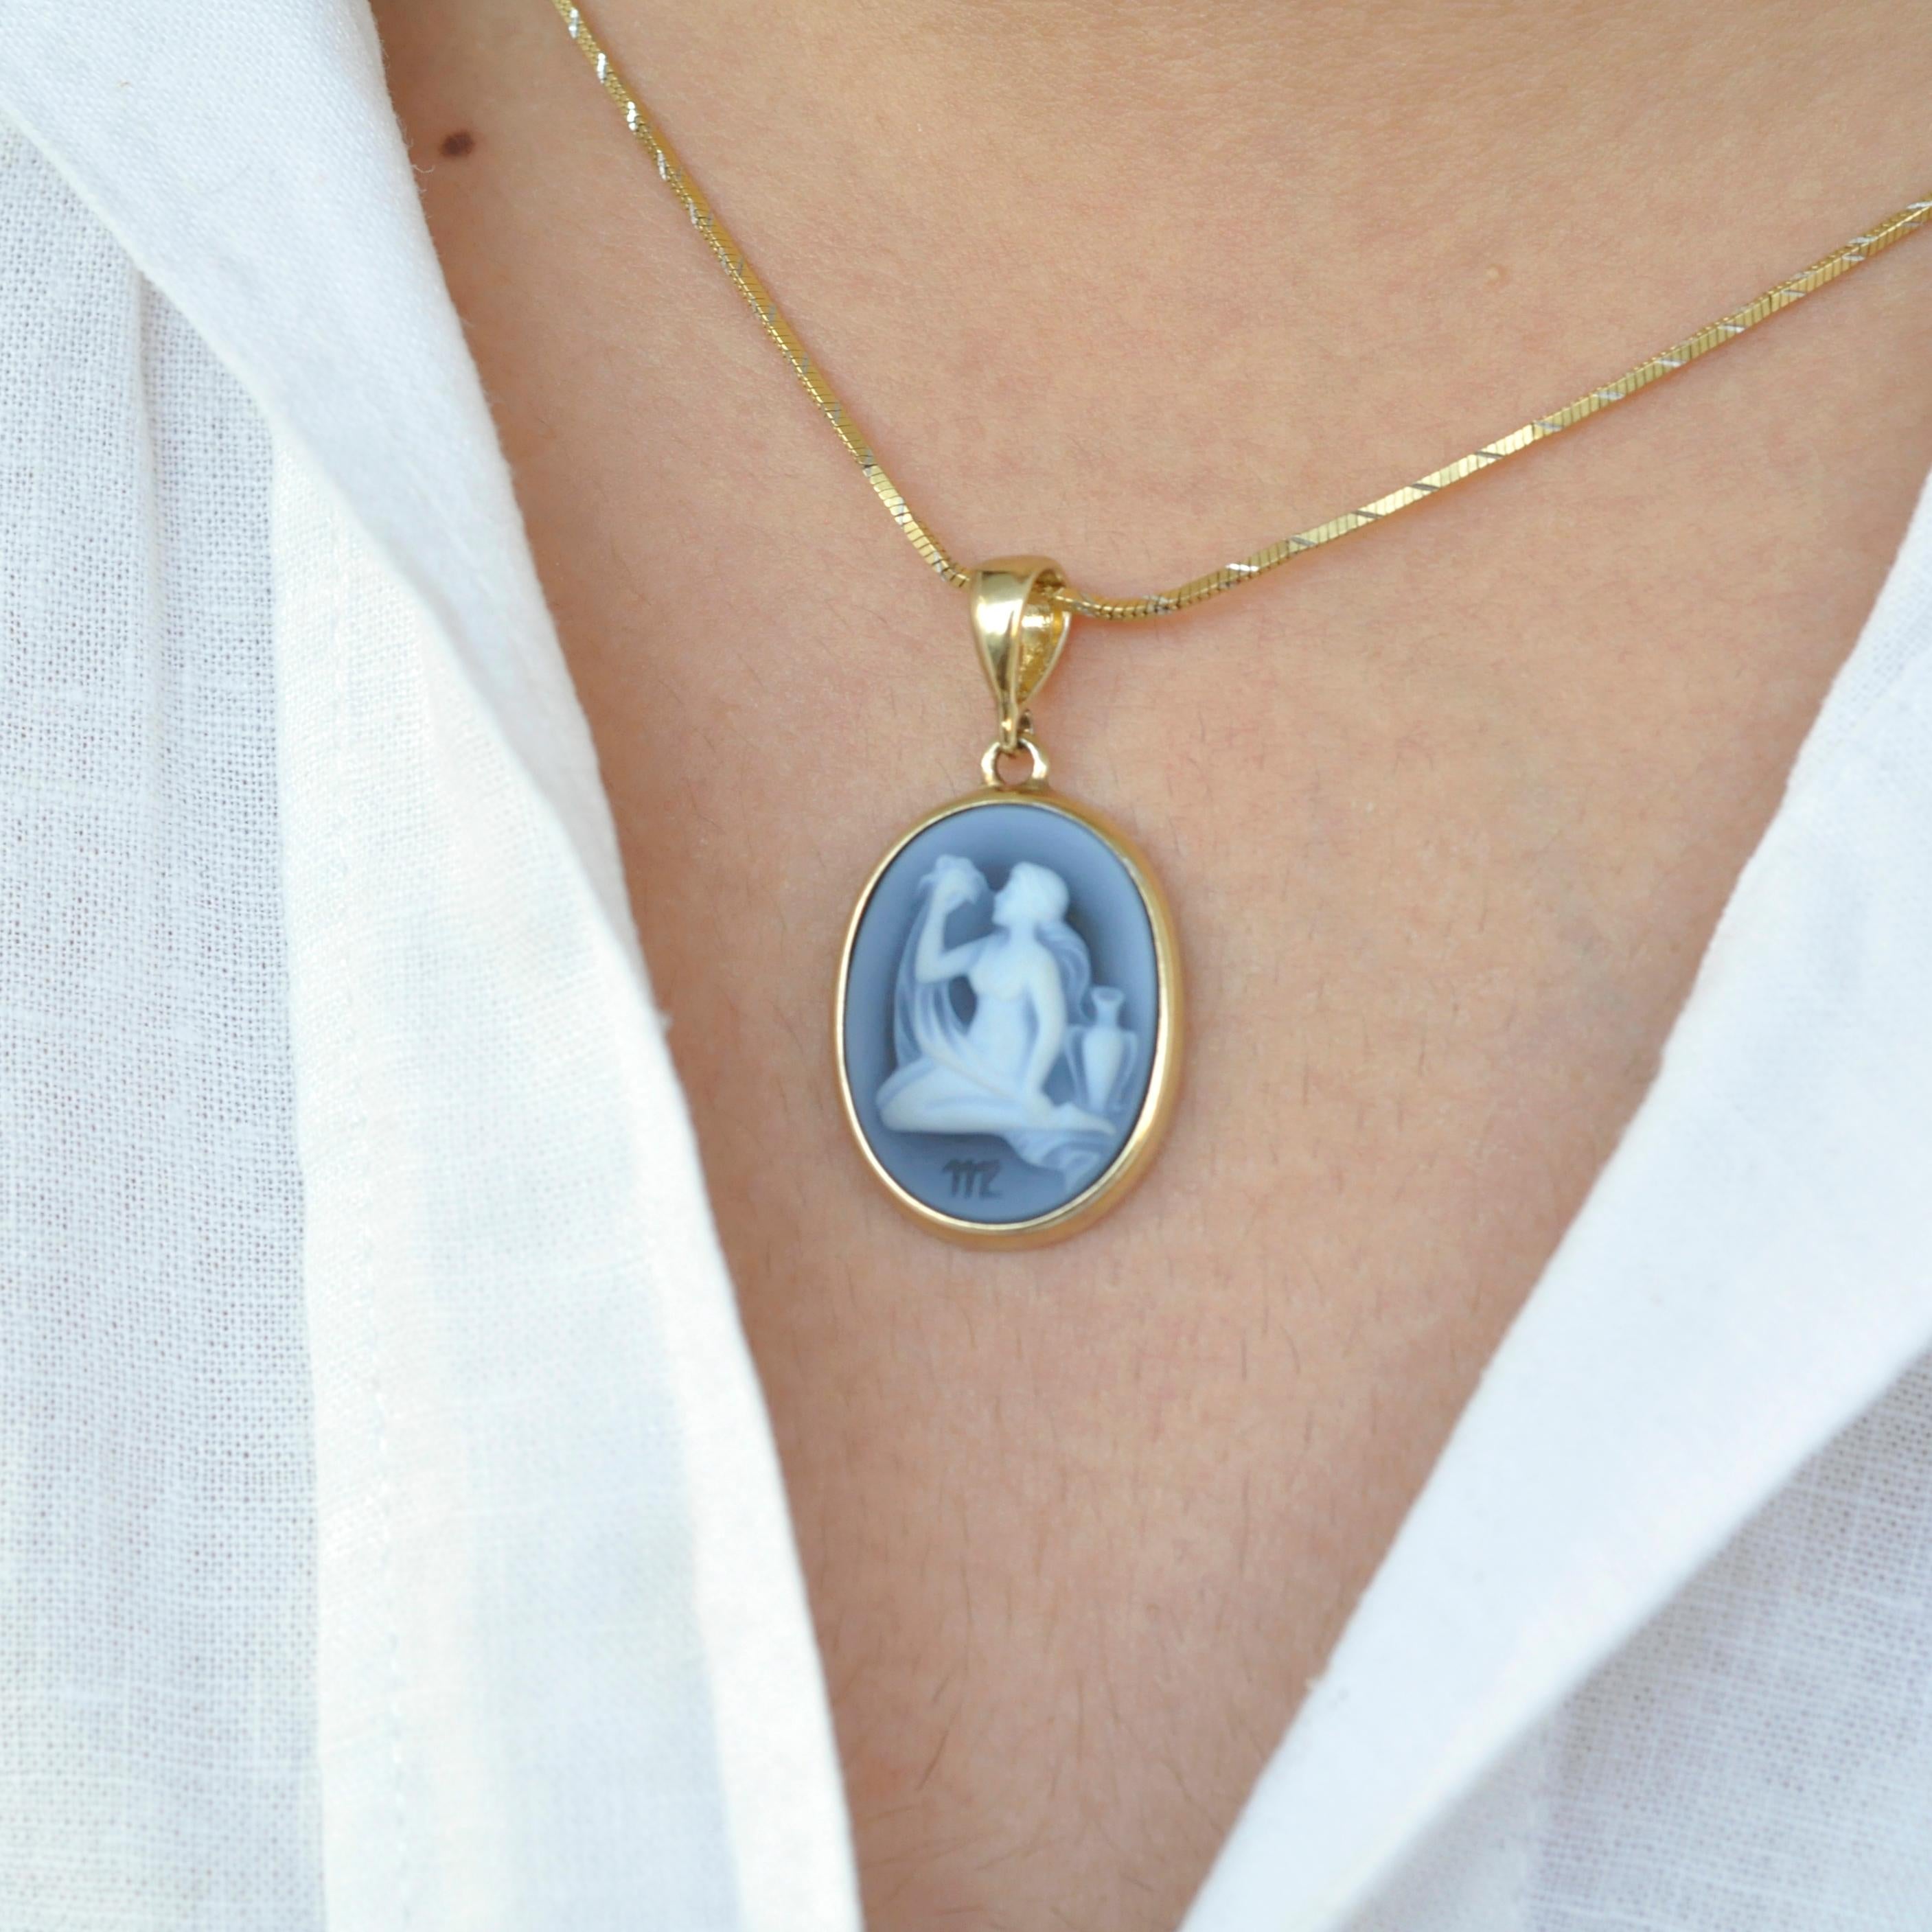 Introducing our exquisite Virgo Zodiac Carving Cameo Pendant Necklace from the Zodiac Collection. This necklace features a meticulously crafted cameo made by an expert cameo engraver in Germany. The cameo is skillfully engraved on a relief of 100%